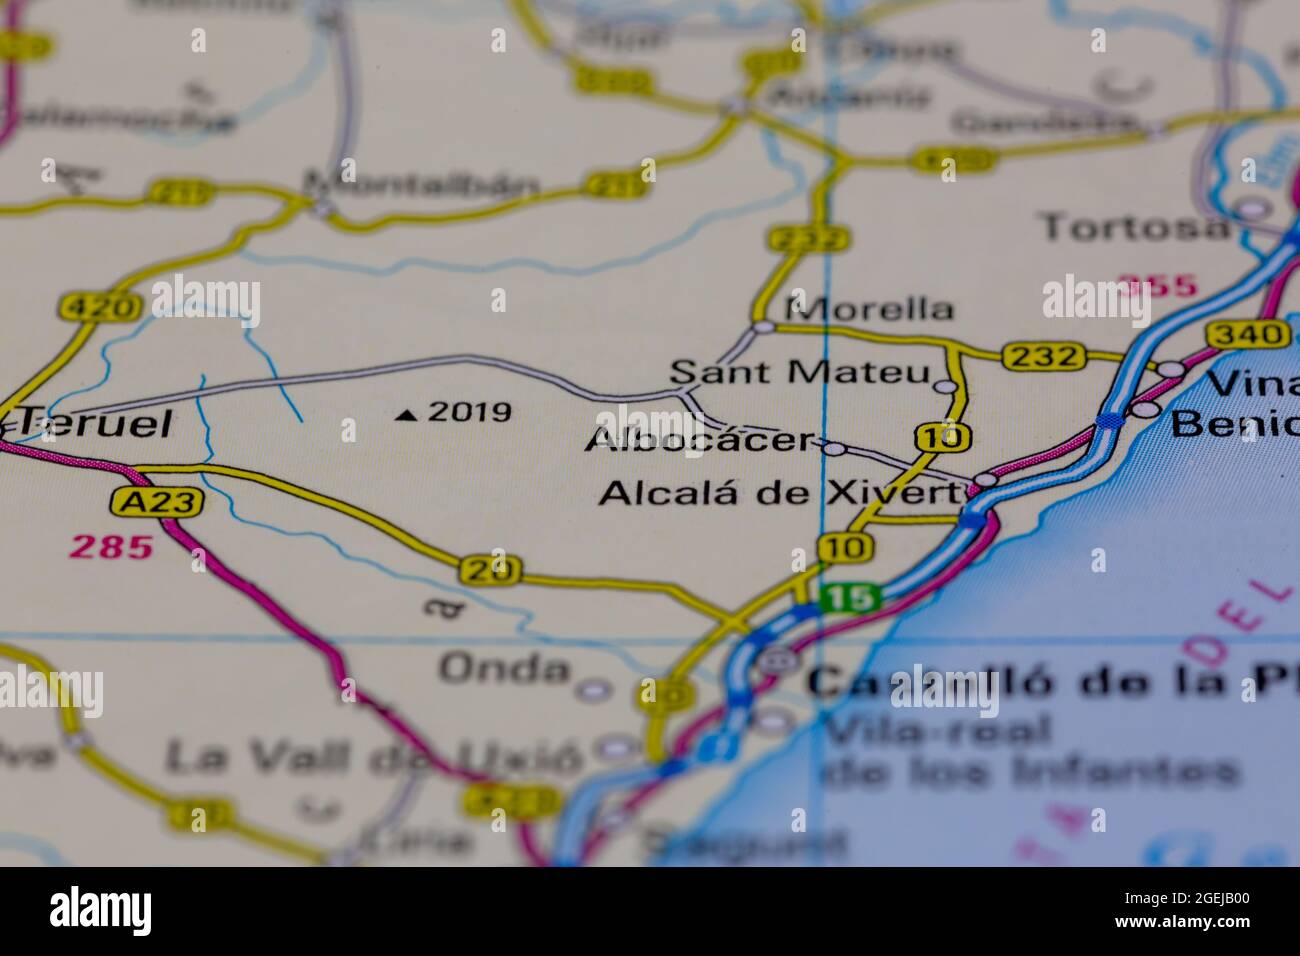 Albocacer Spain shown on a road map or Geography map Stock Photo